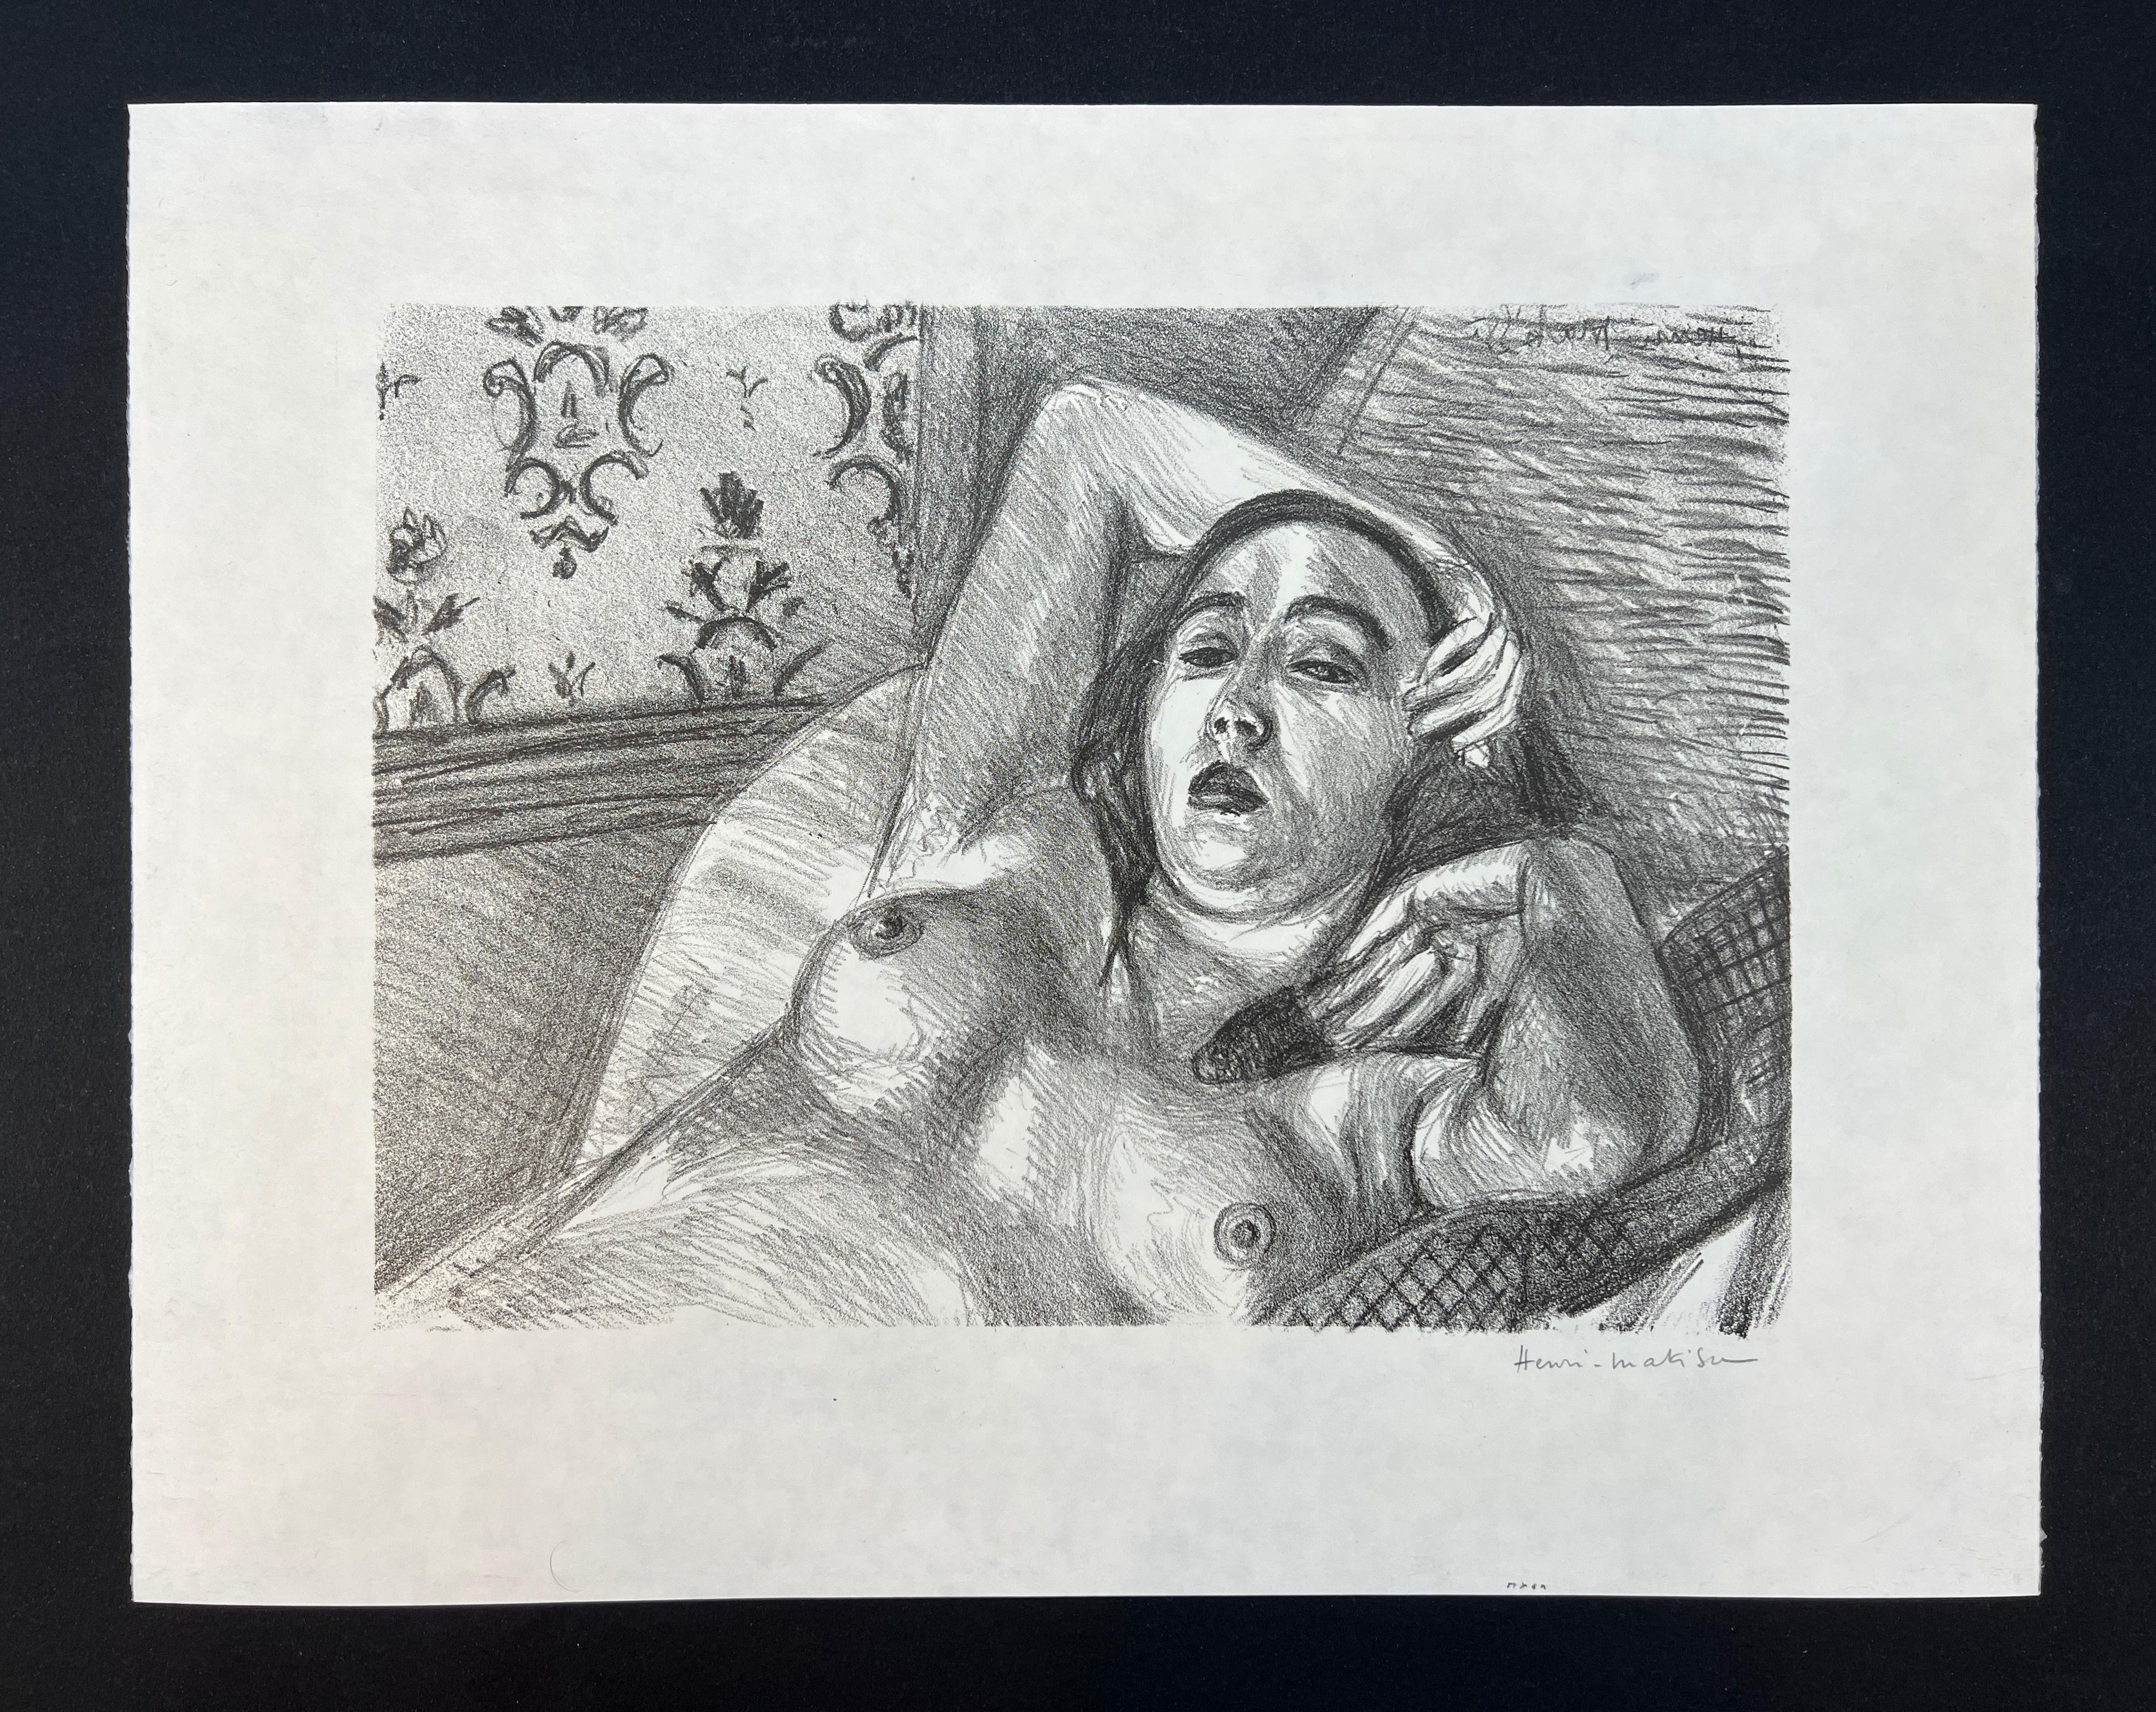 HENRI MATISSE (1869-1954)
Le Repos du modèle
lithograph, on Japanese paper, 1922, Duthuit’s first state (of two), signed in pencil by artist, one of 85 signed impressions from a planned edition of 100 before the reduction of the plate at the left,
(